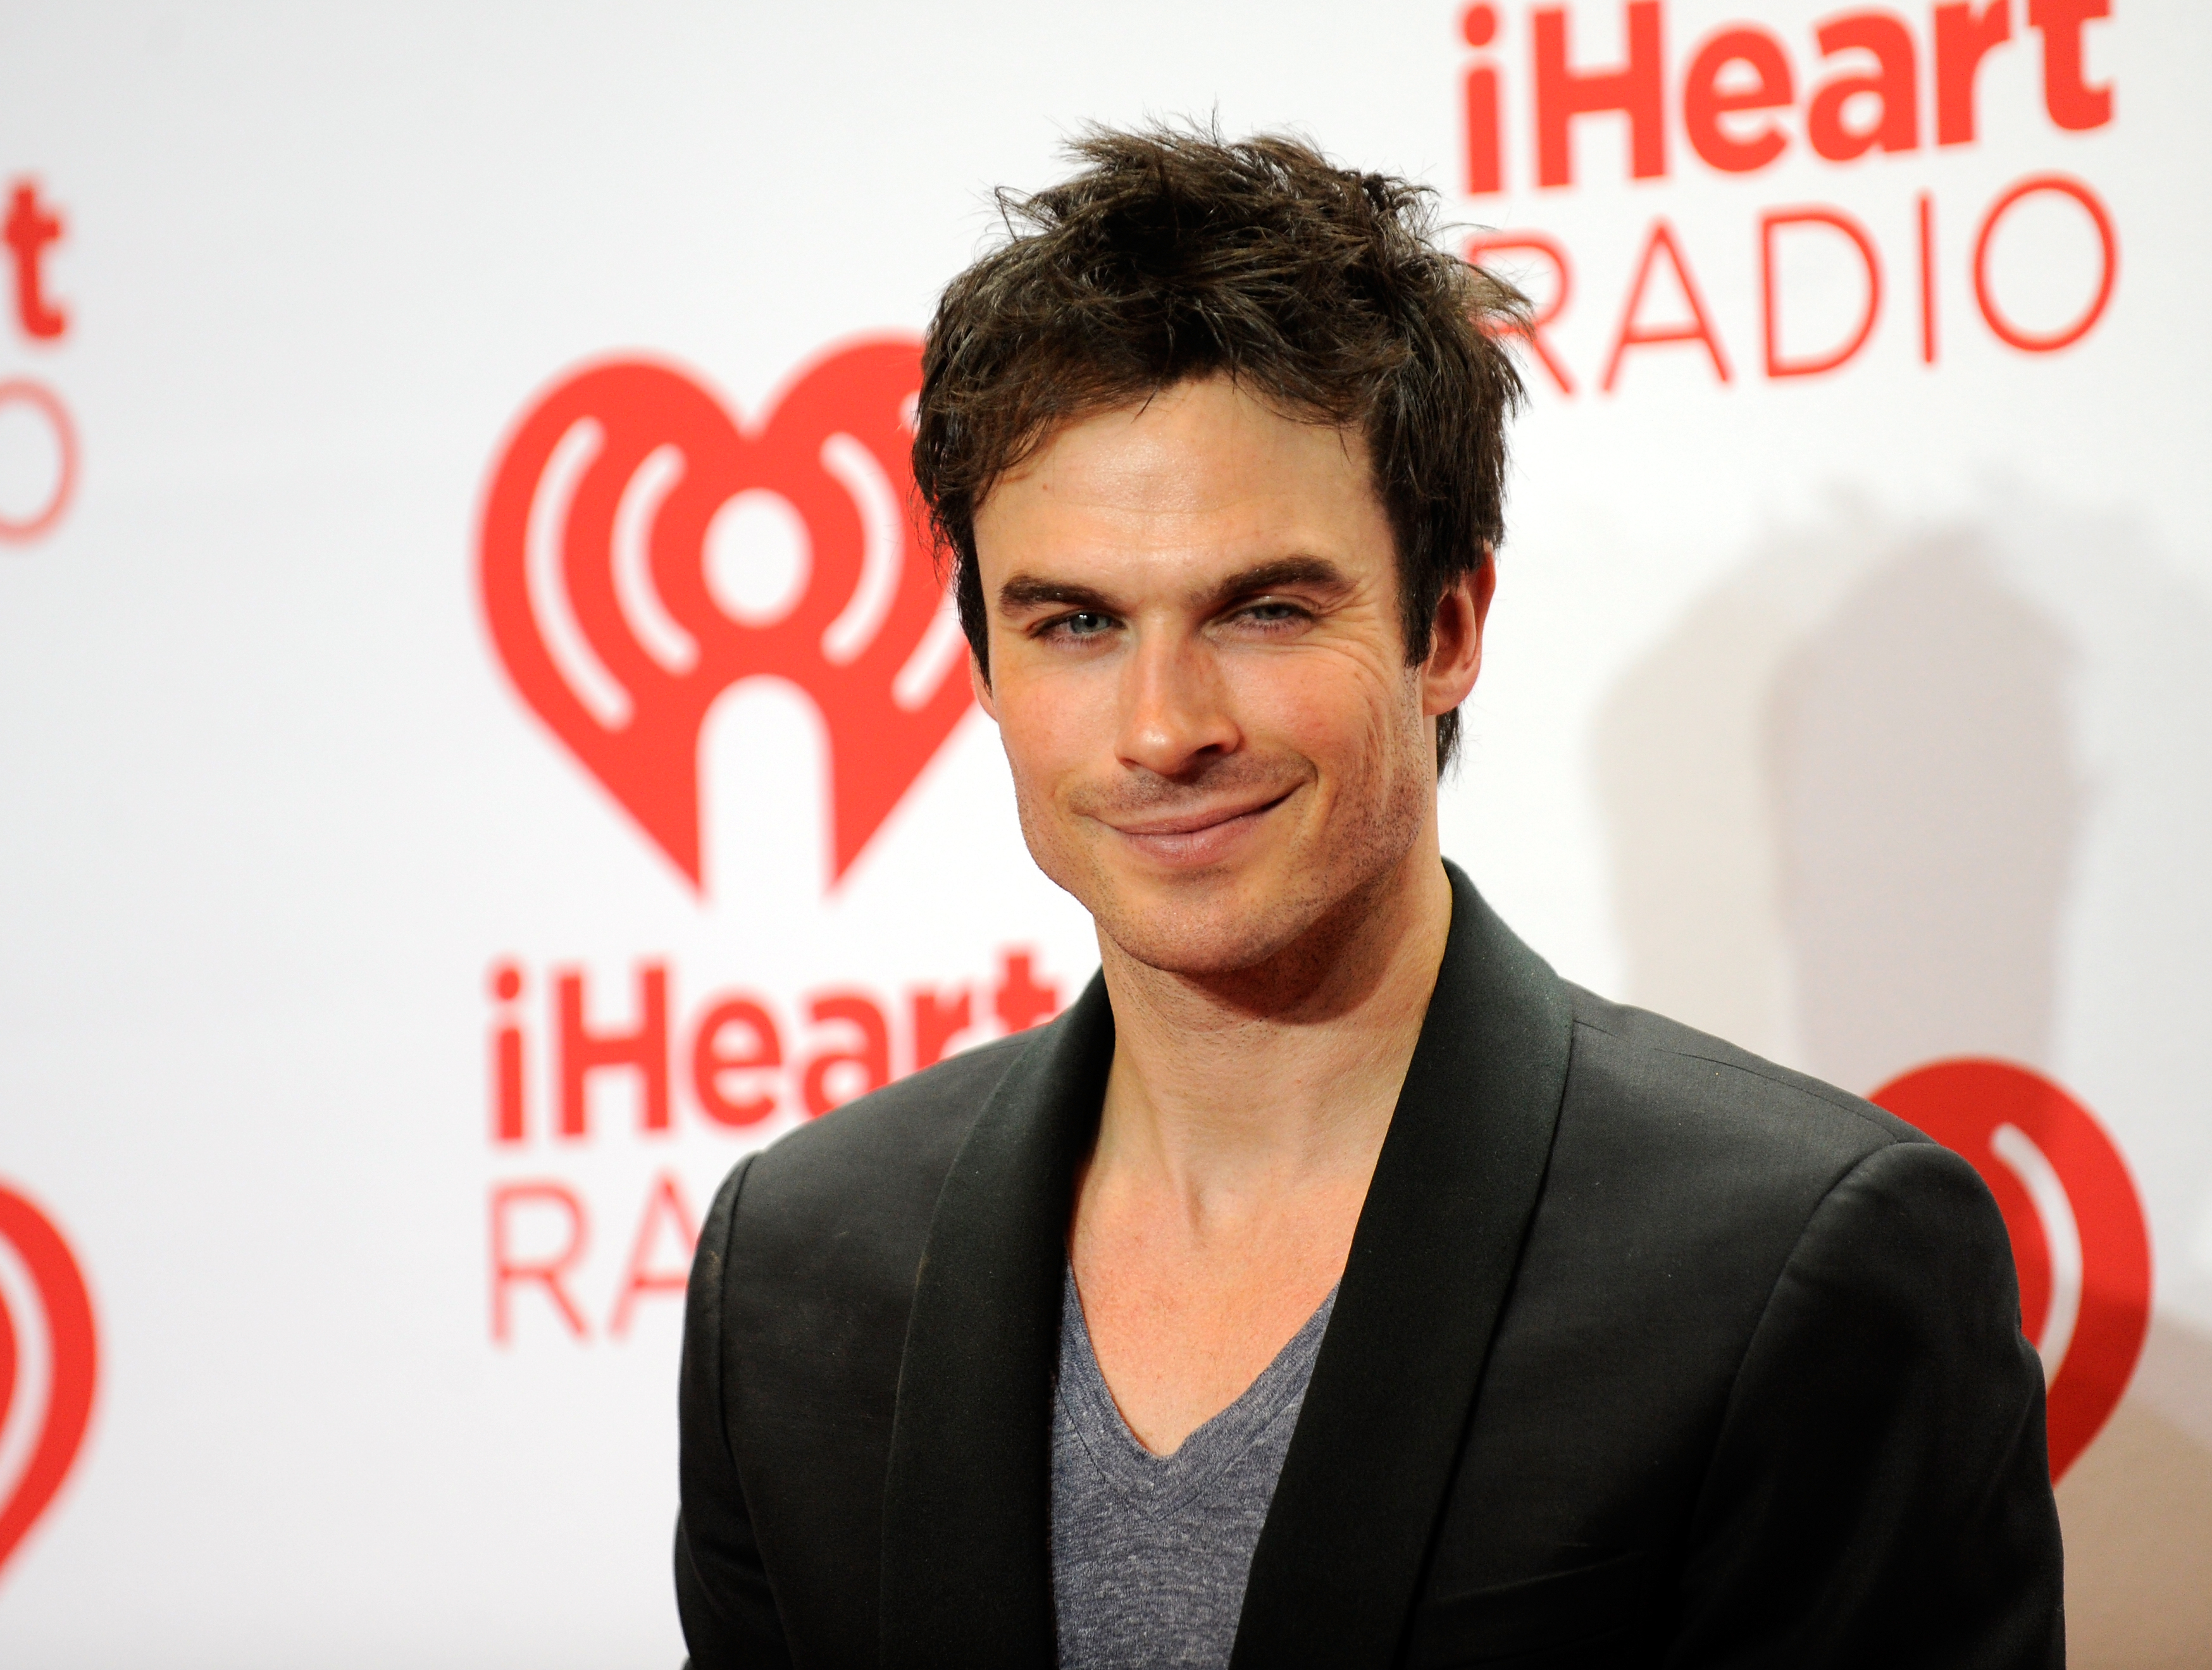 LAS VEGAS, NV - SEPTEMBER 21: Actor Ian Somerhalder attends the iHeartRadio Music Festival at the MGM Grand Garden Arena on September 21, 2013 in Las Vegas, Nevada. (Photo by David Becker/Getty Images for Clear Channel)